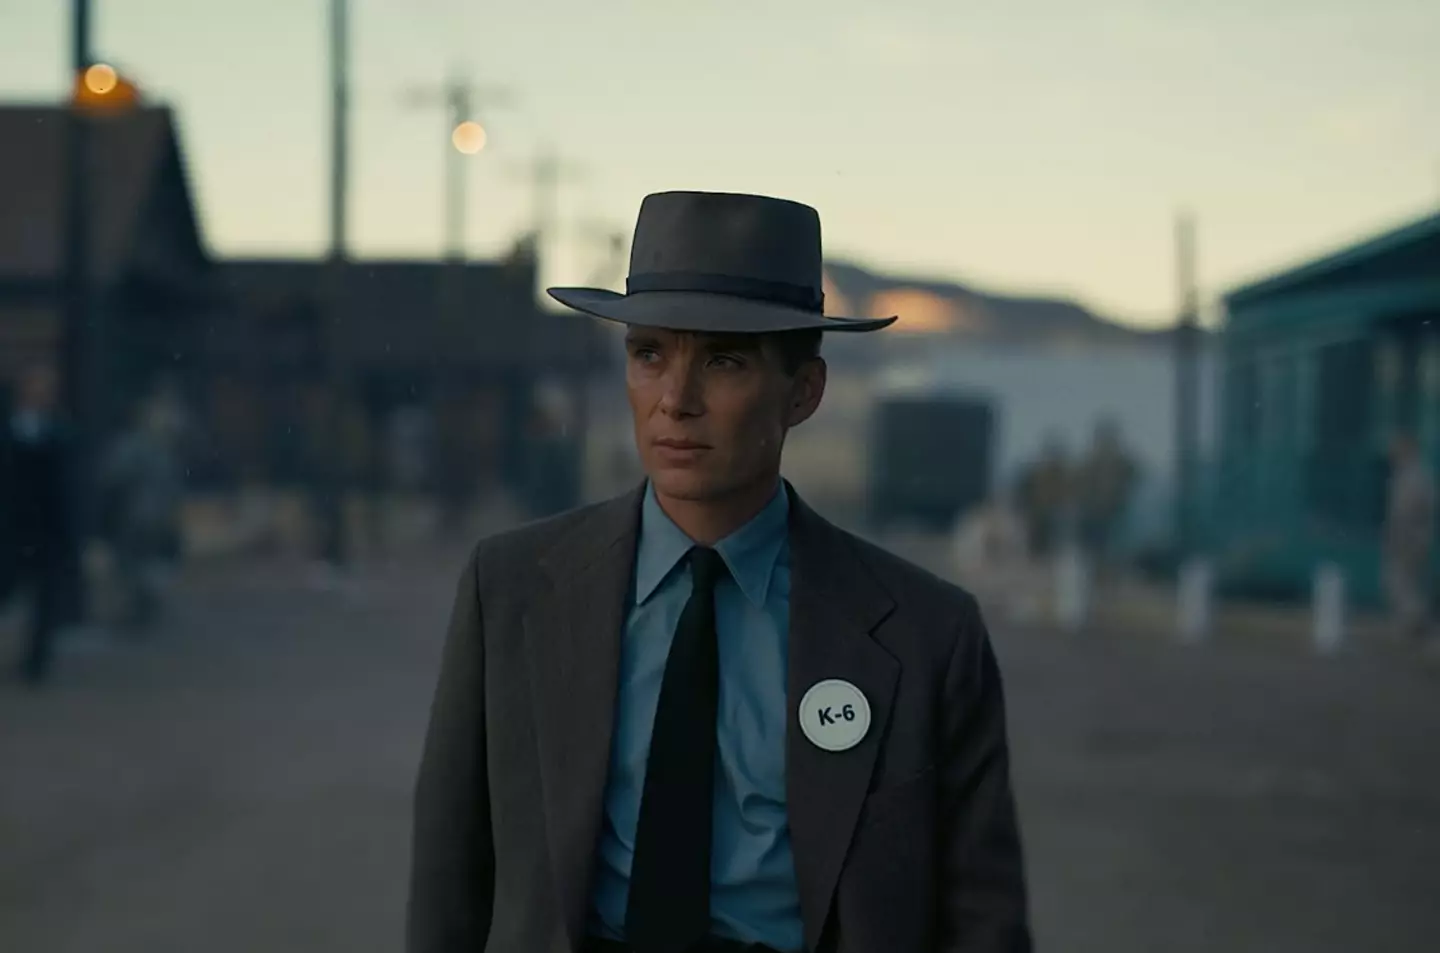 Cillian Murphy took home the award for his role in Oppenheimer.